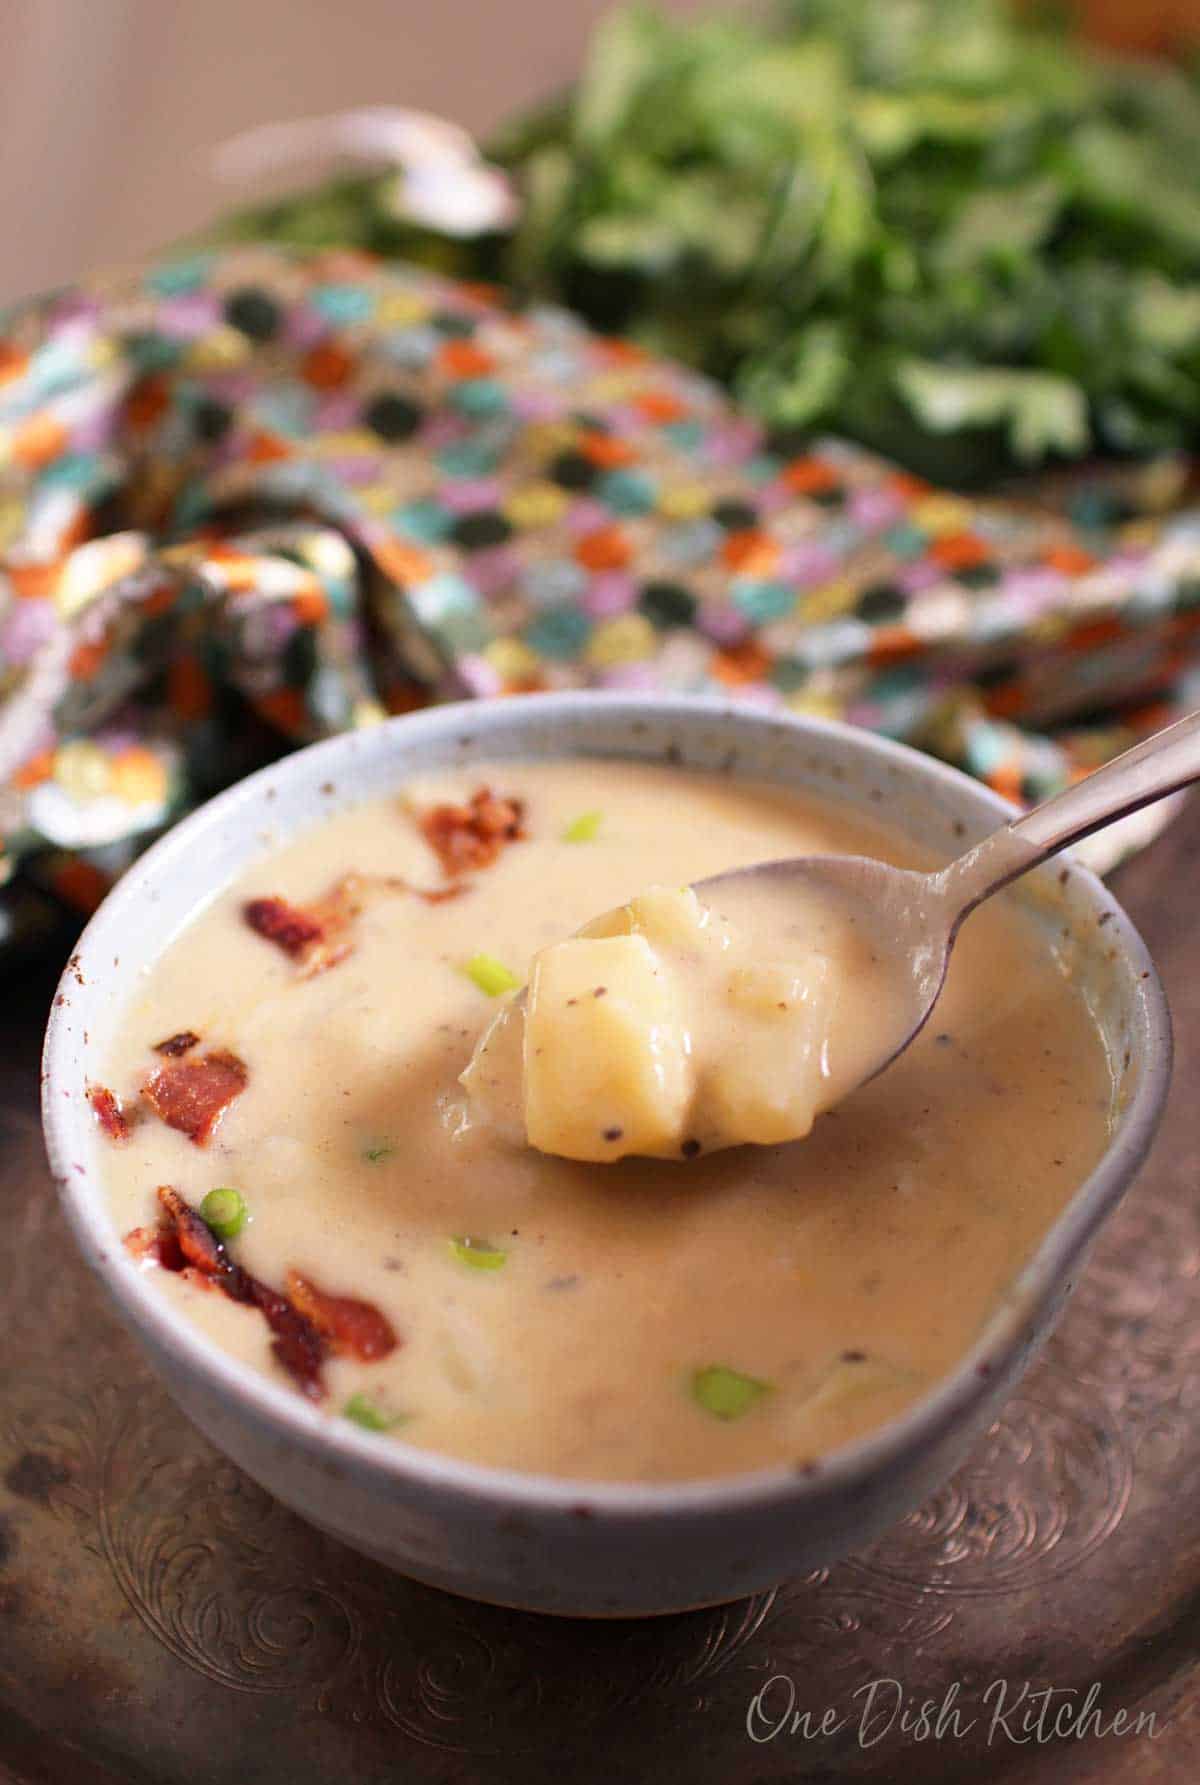 A spoonful of potato soup topped with chopped bacon from a bowl on a metal tray next to a multi-colored cloth napkin.